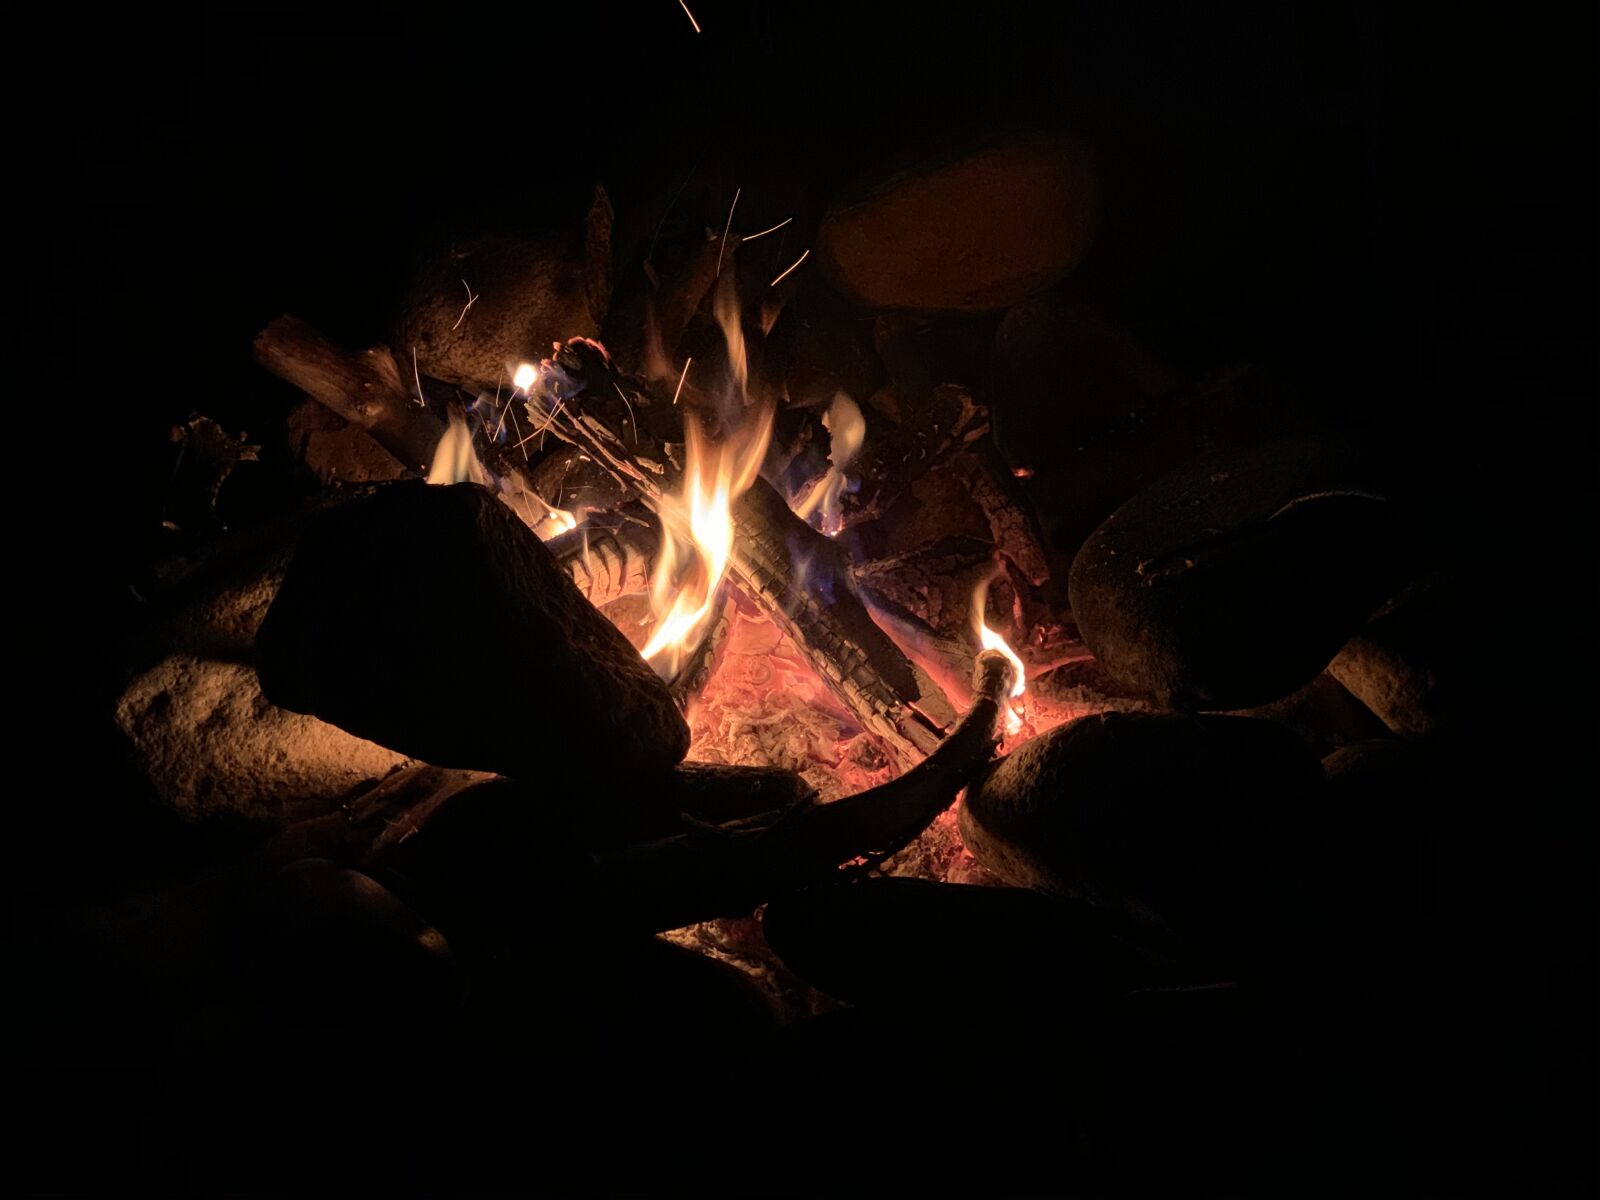 Apple iPhone XS + iPhone XS back dual camera 6mm f/2.4 sample photo. Bonfire, wilderness life, atmospheric photography